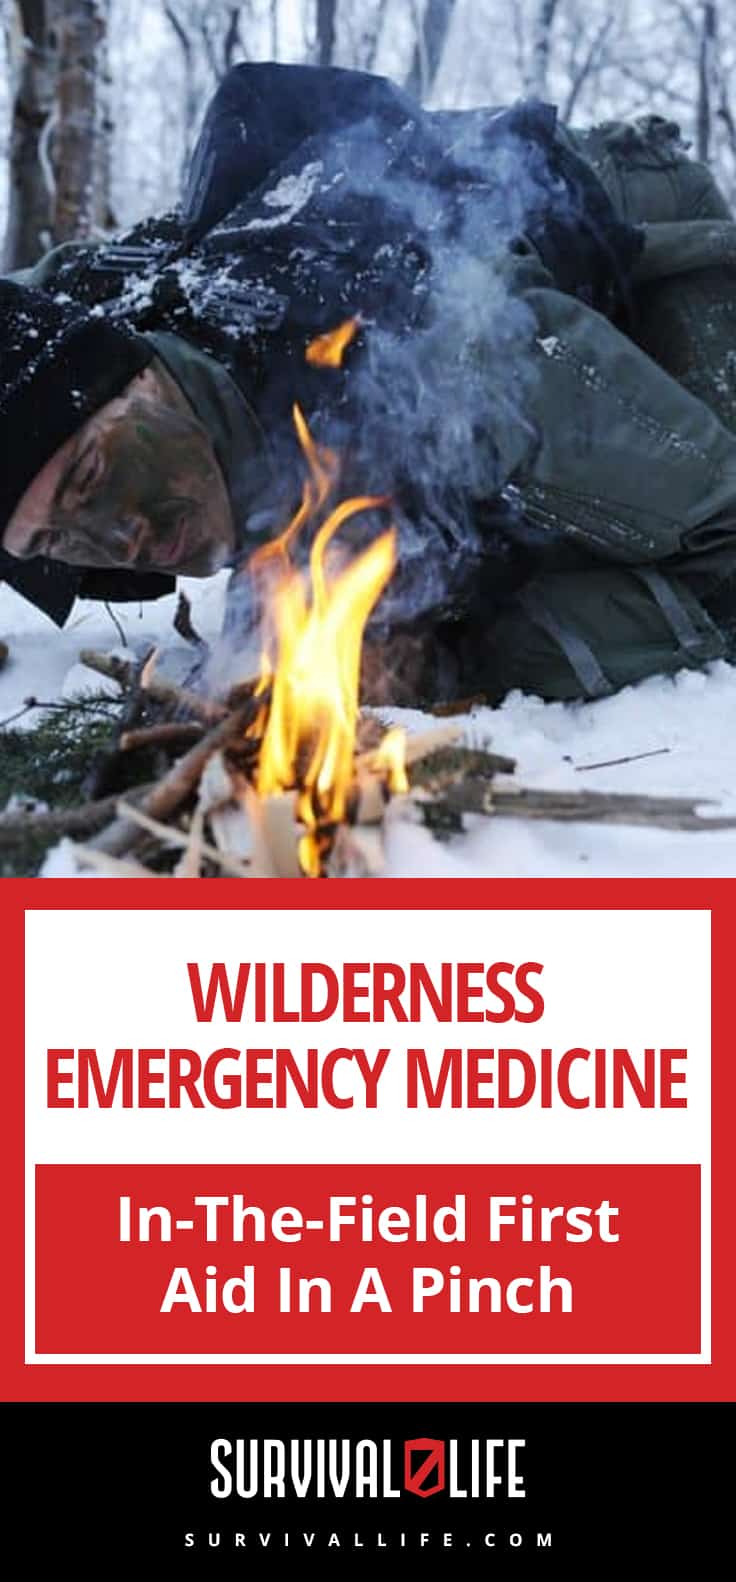 Placard | Wilderness Emergency Medicine | In-The-Field First Aid In A Pinch